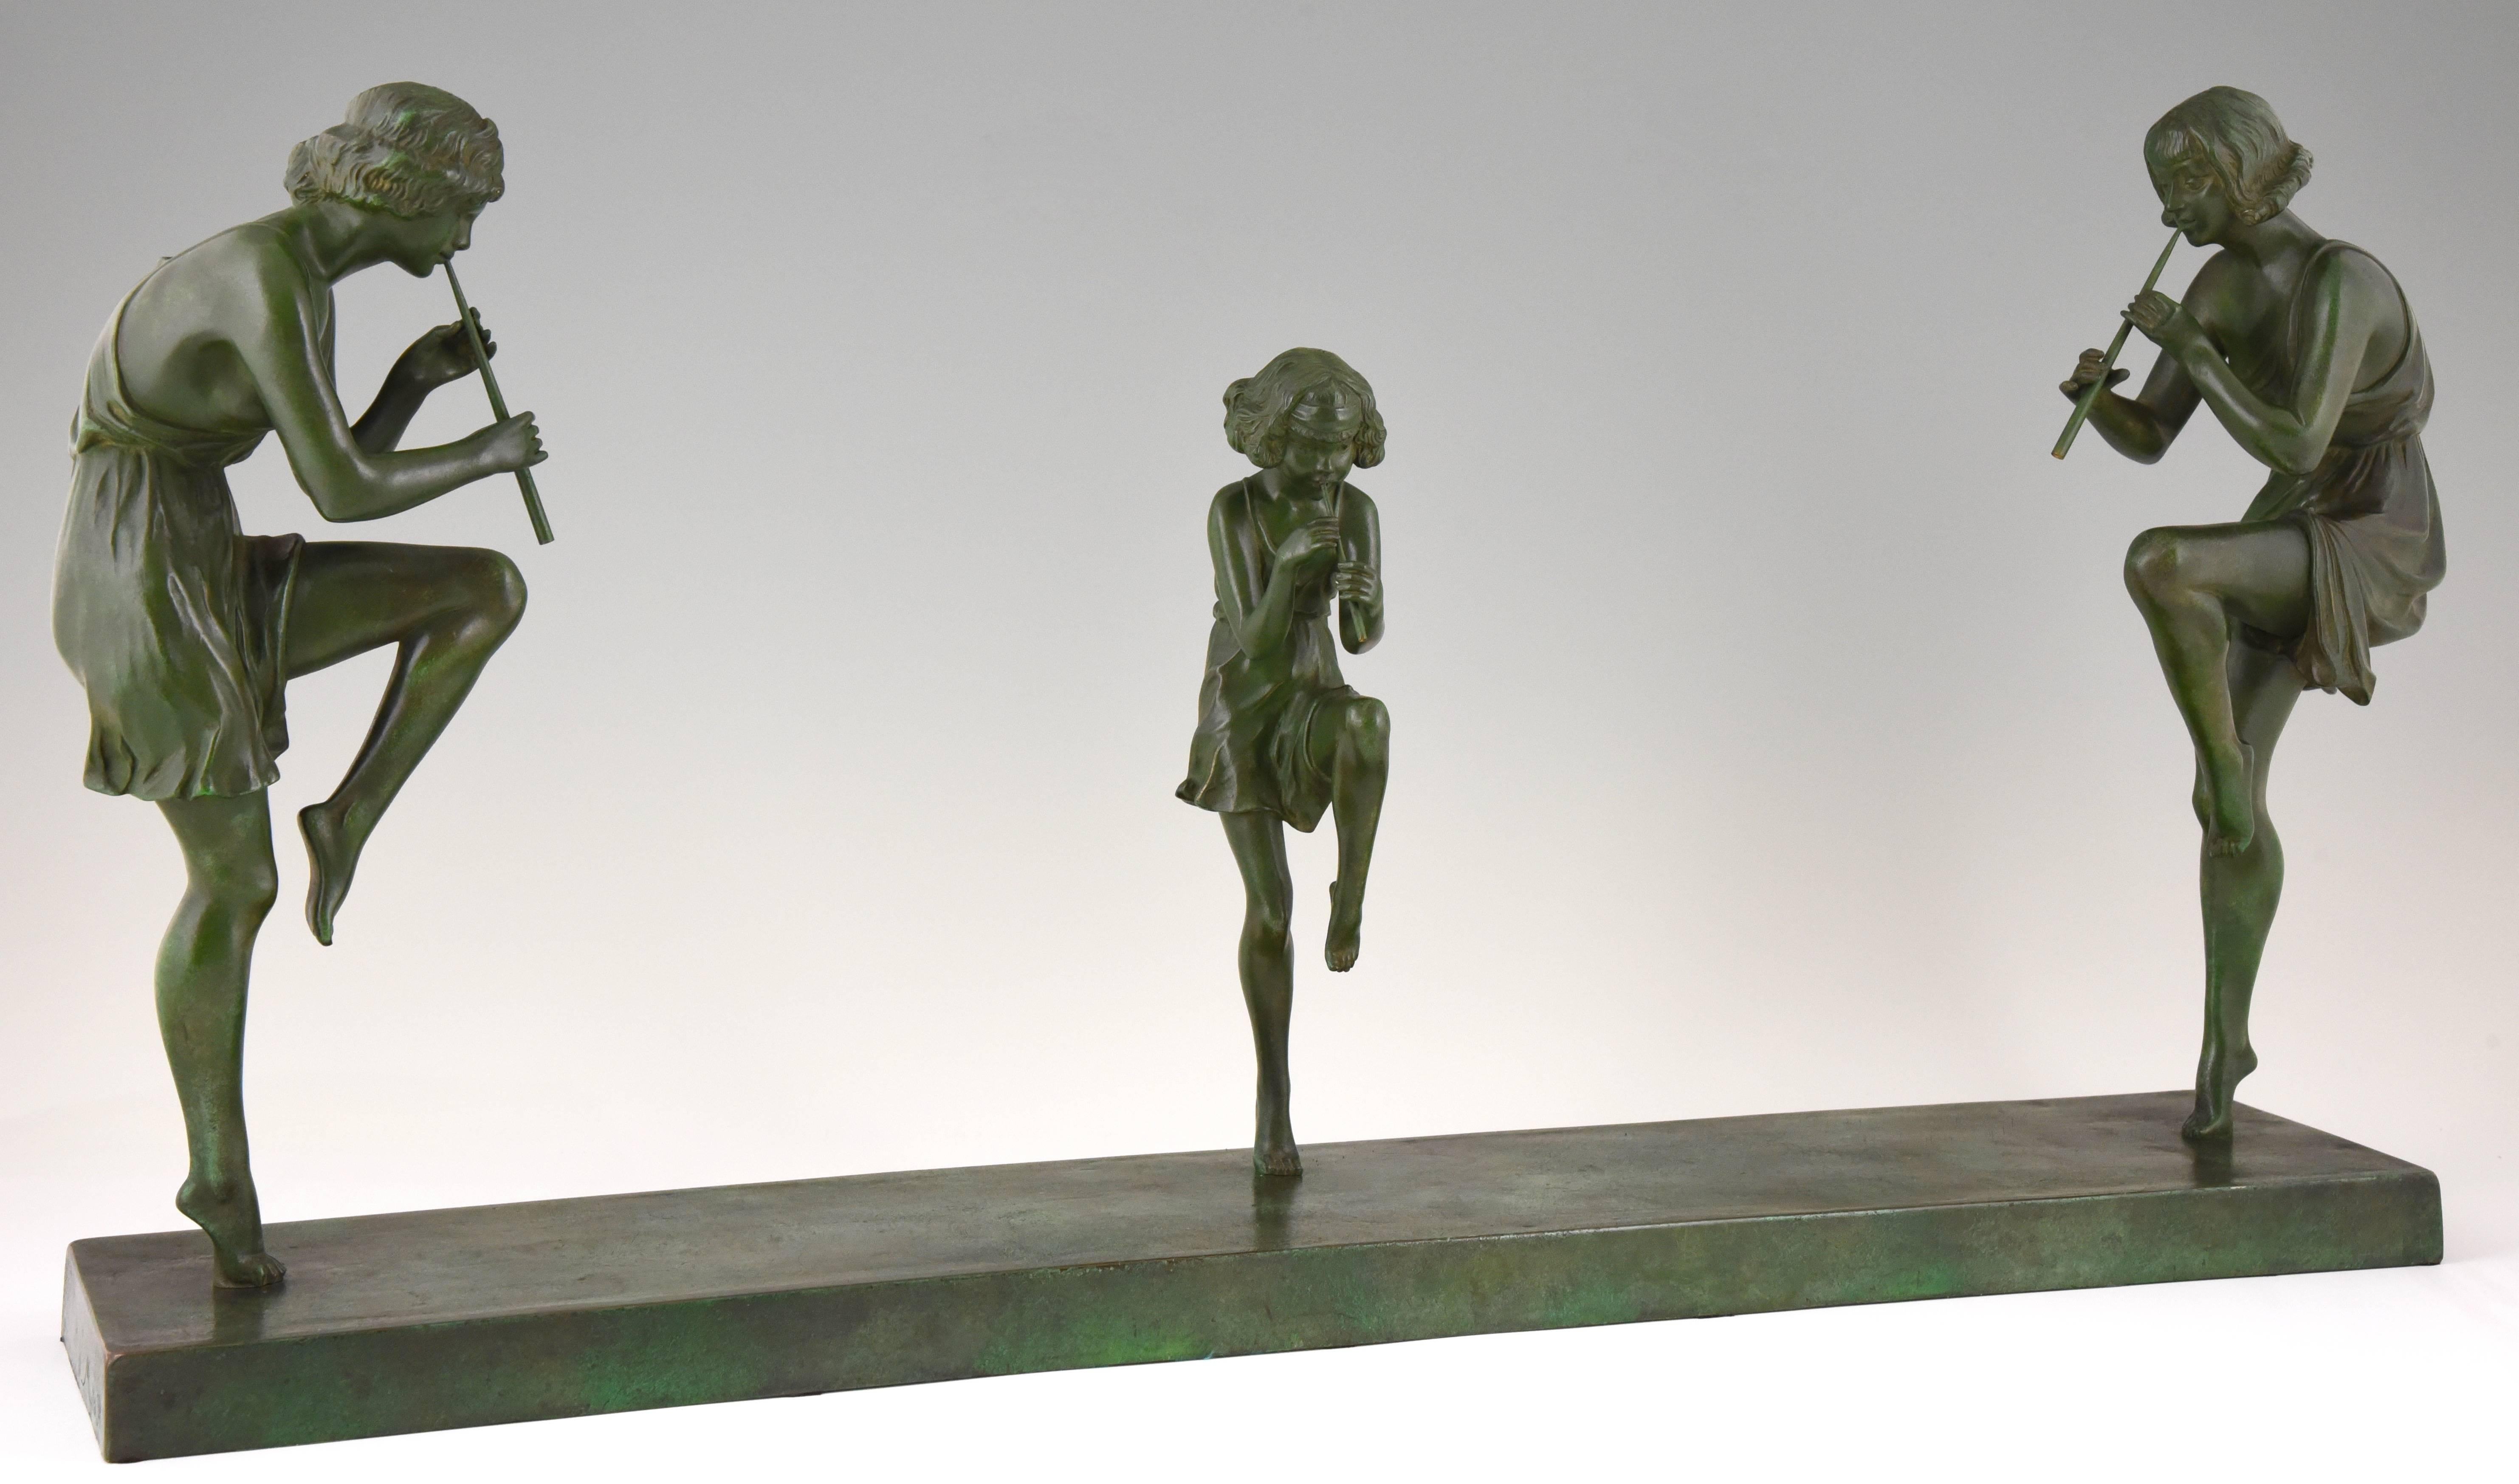 Art Deco bronze sculpture of three flute players.
Impressive bronze group of two young women and a young girl, wearing short floaty dresses, each balancing on one leg while playing a flute by Matto, Marcel Bouraine. 

Signature or Marks: Matto